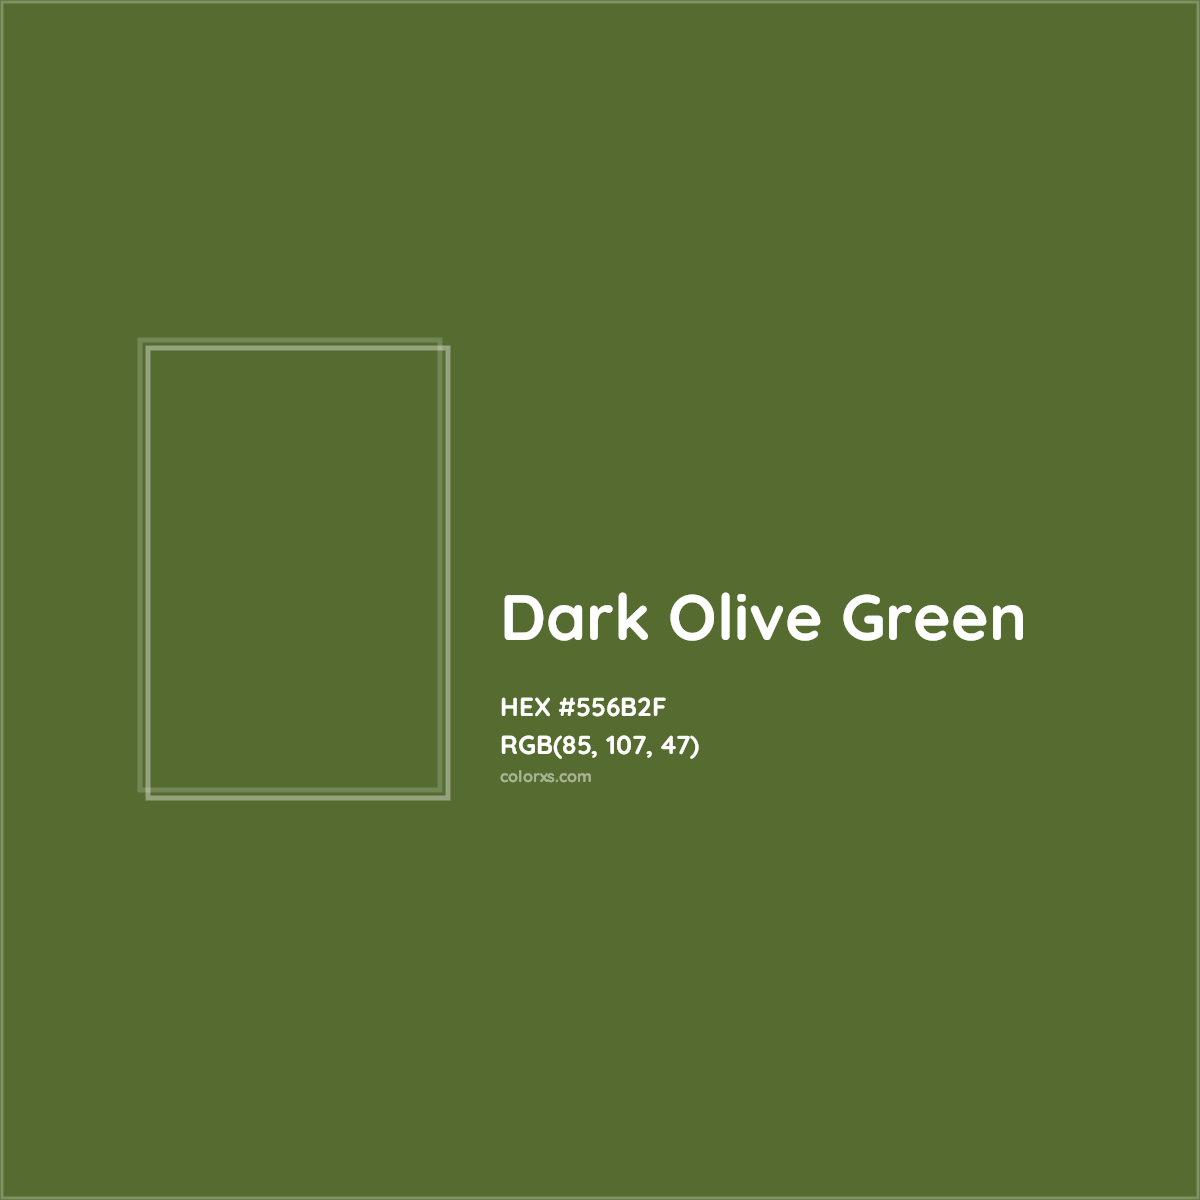 About Dark Olive Green - Color codes, similar colors and paints 